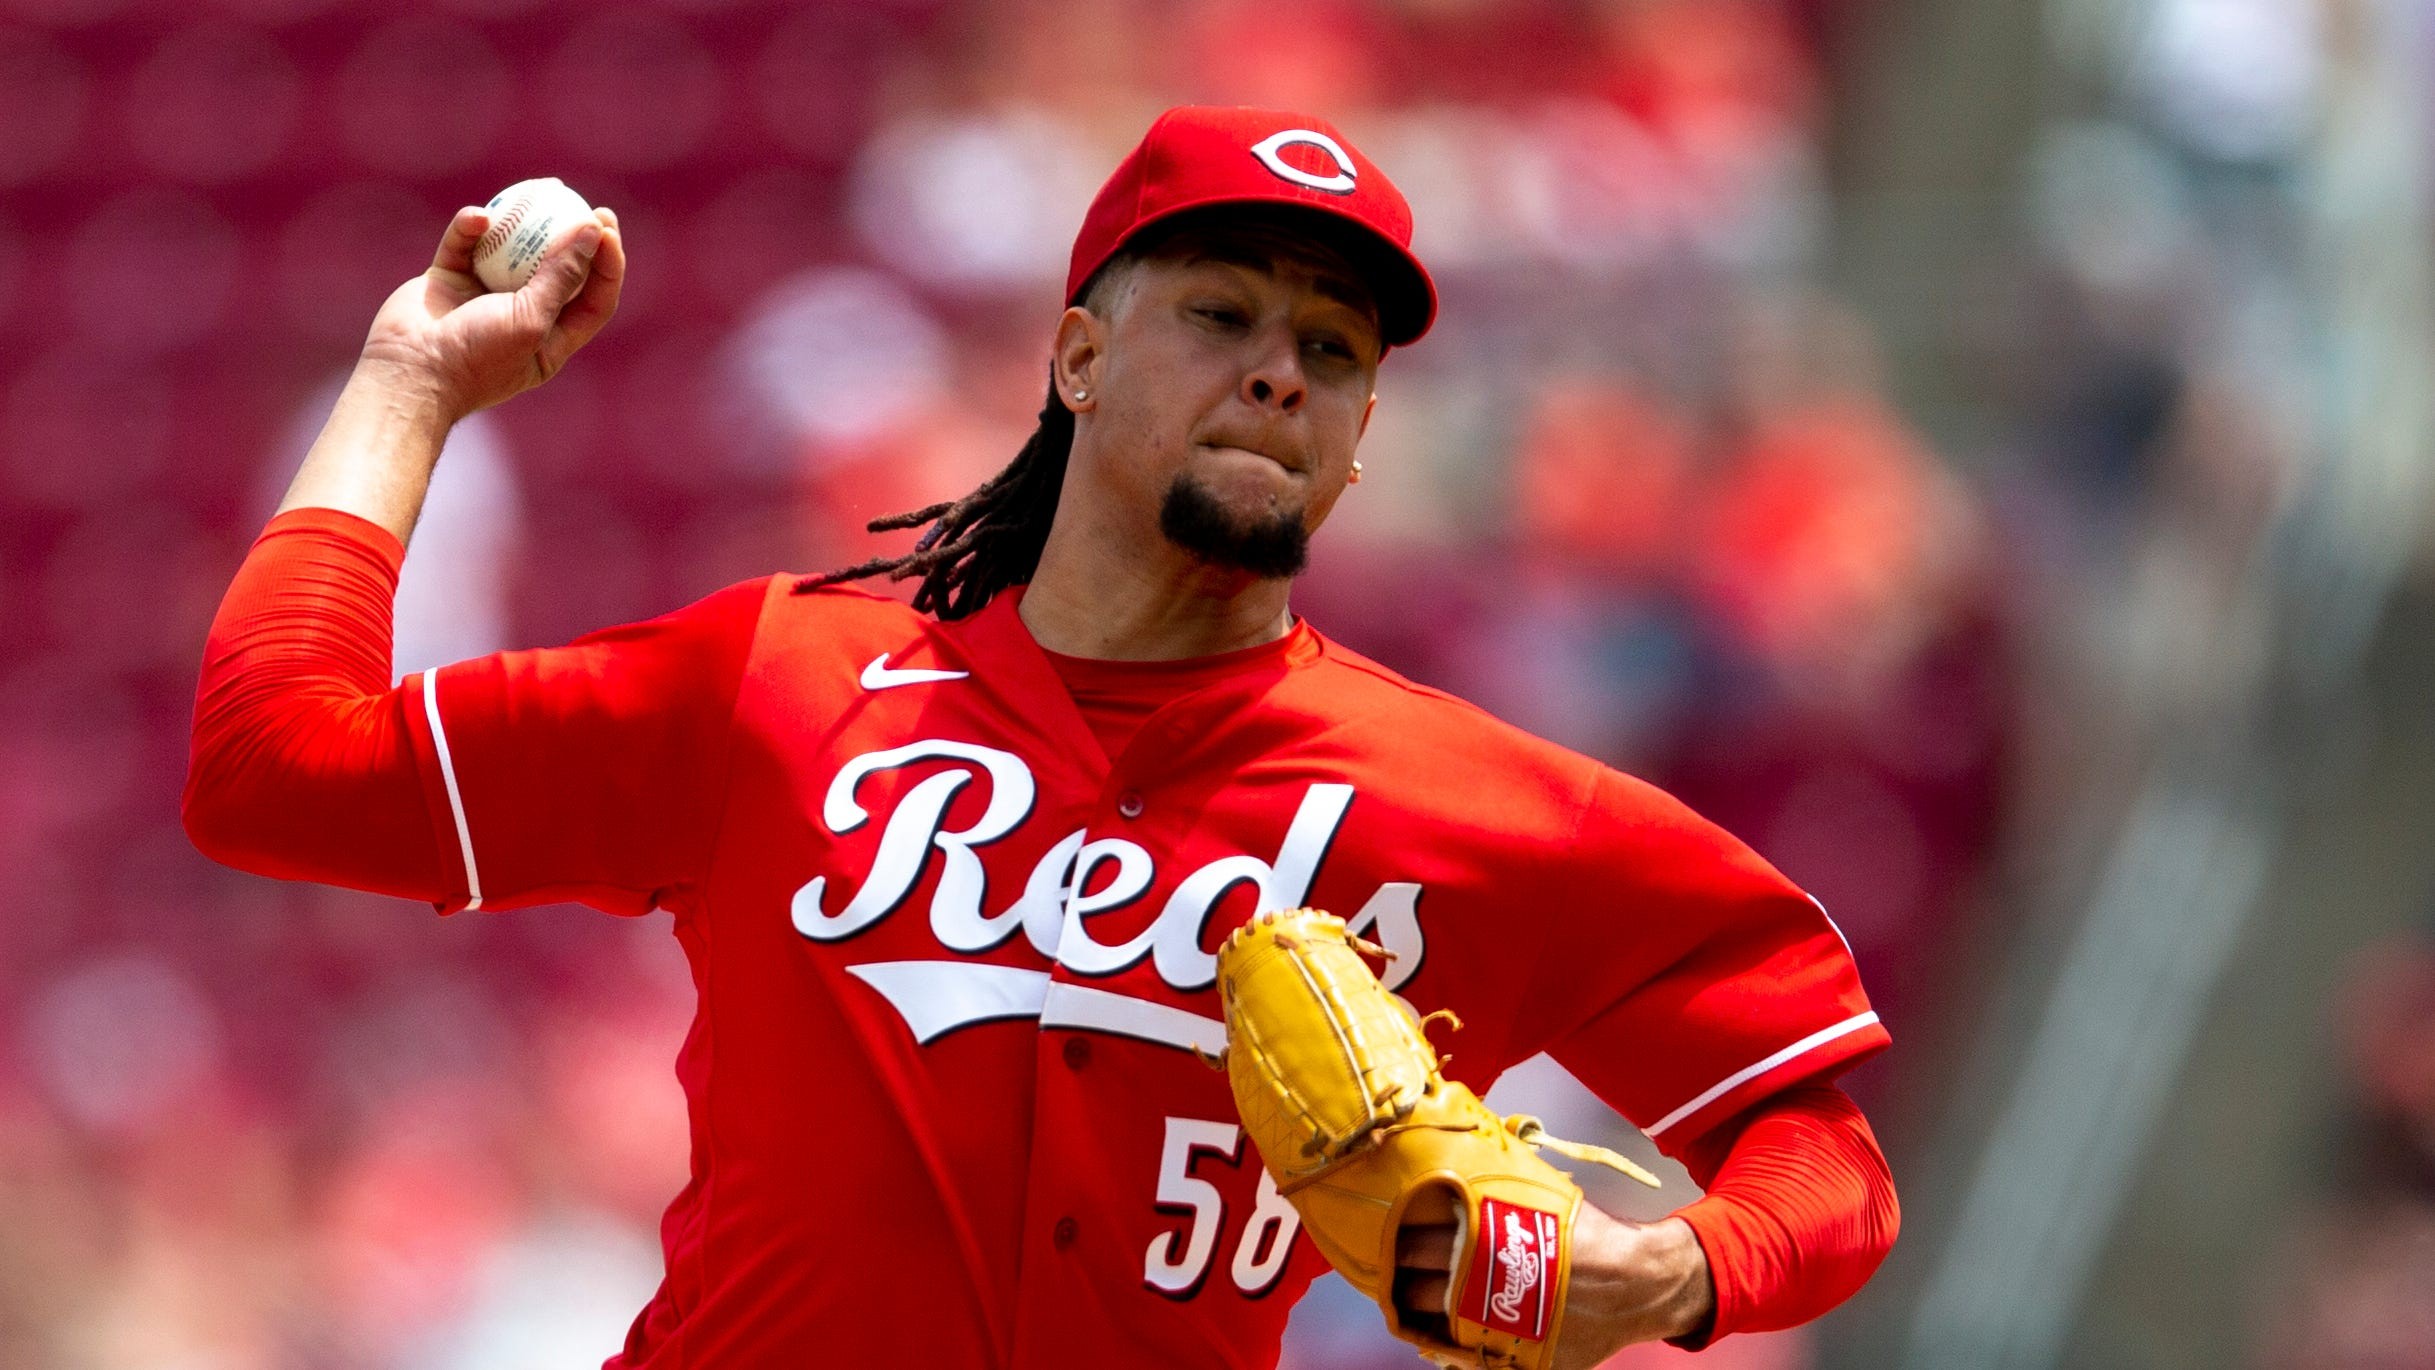 Cincinnati Reds pitcher Luis Castillo selected to play in second MLB